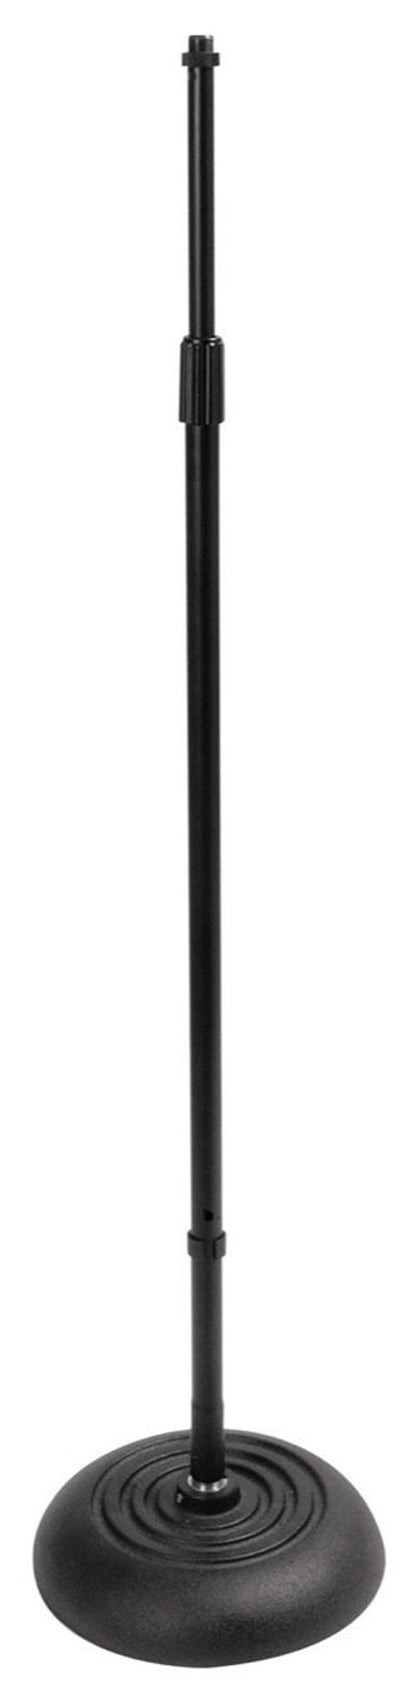 On Stage MS7201QTR Quarter-Turn Round Base Microphone Stand